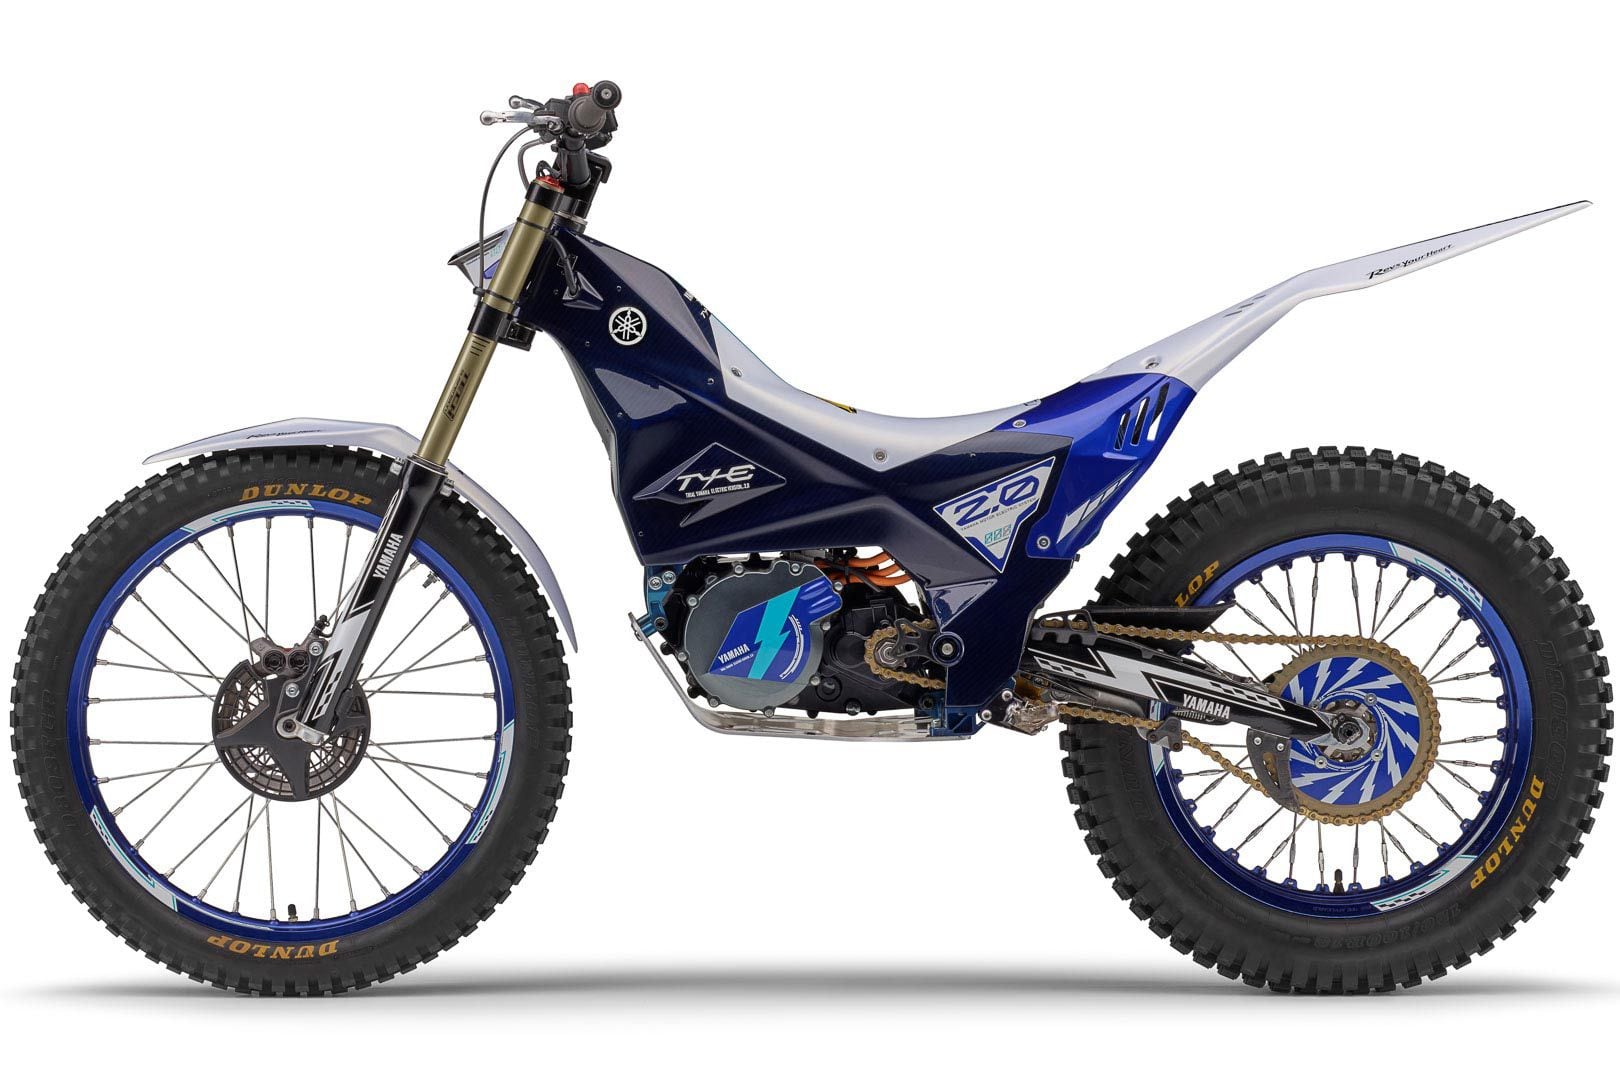 This bike will compete in part of motorcycle racing history as electric motorcycles will directly compete with gas-powered ones during the 2022 FIM Trial World Championship.